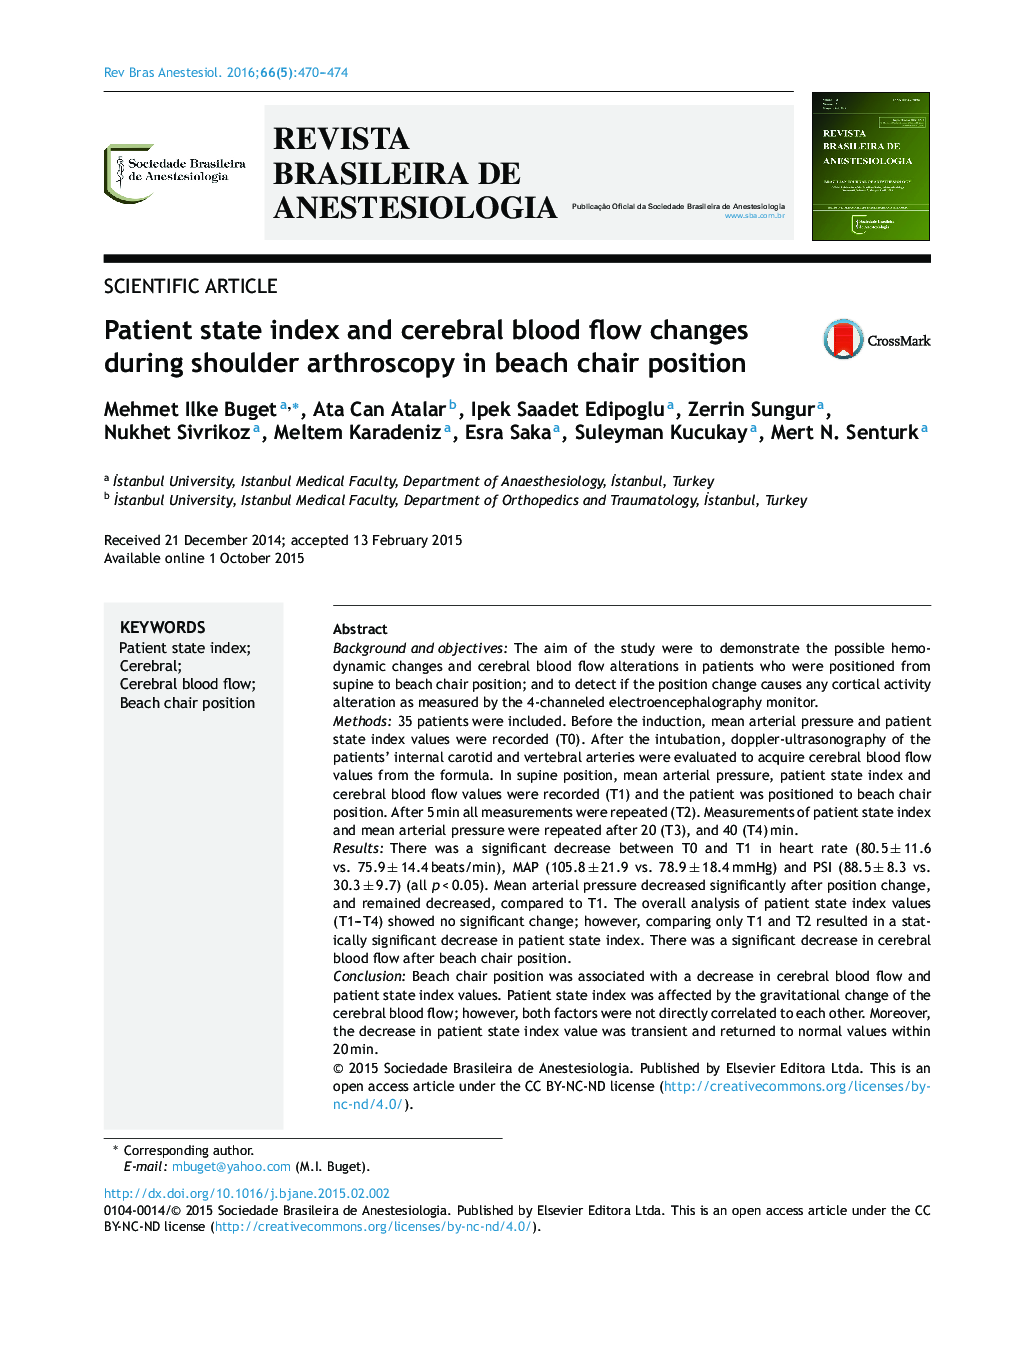 Patient state index and cerebral blood flow changes during shoulder arthroscopy in beach chair position